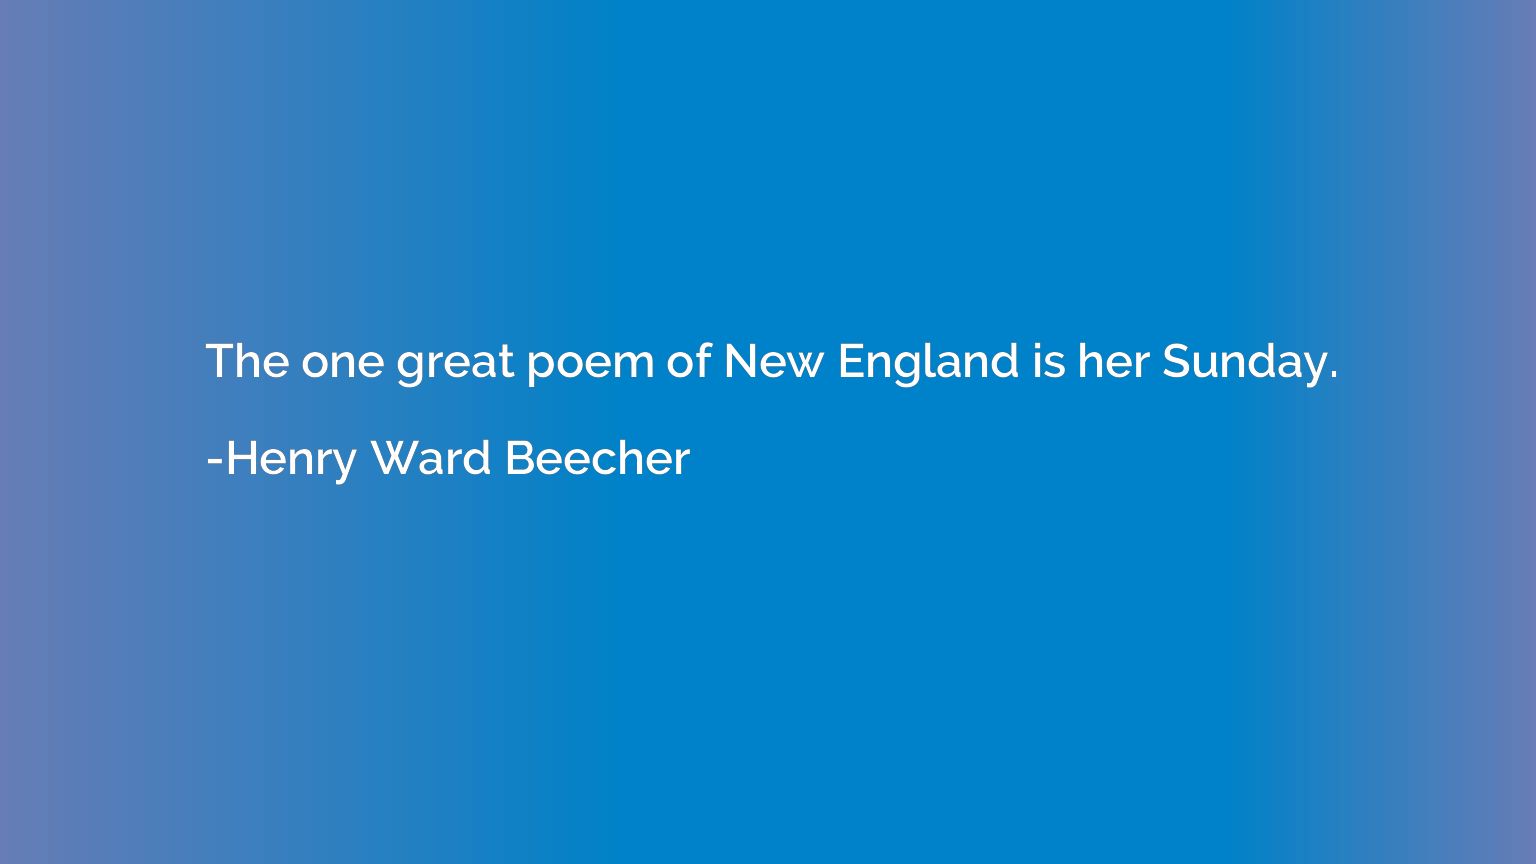 The one great poem of New England is her Sunday.